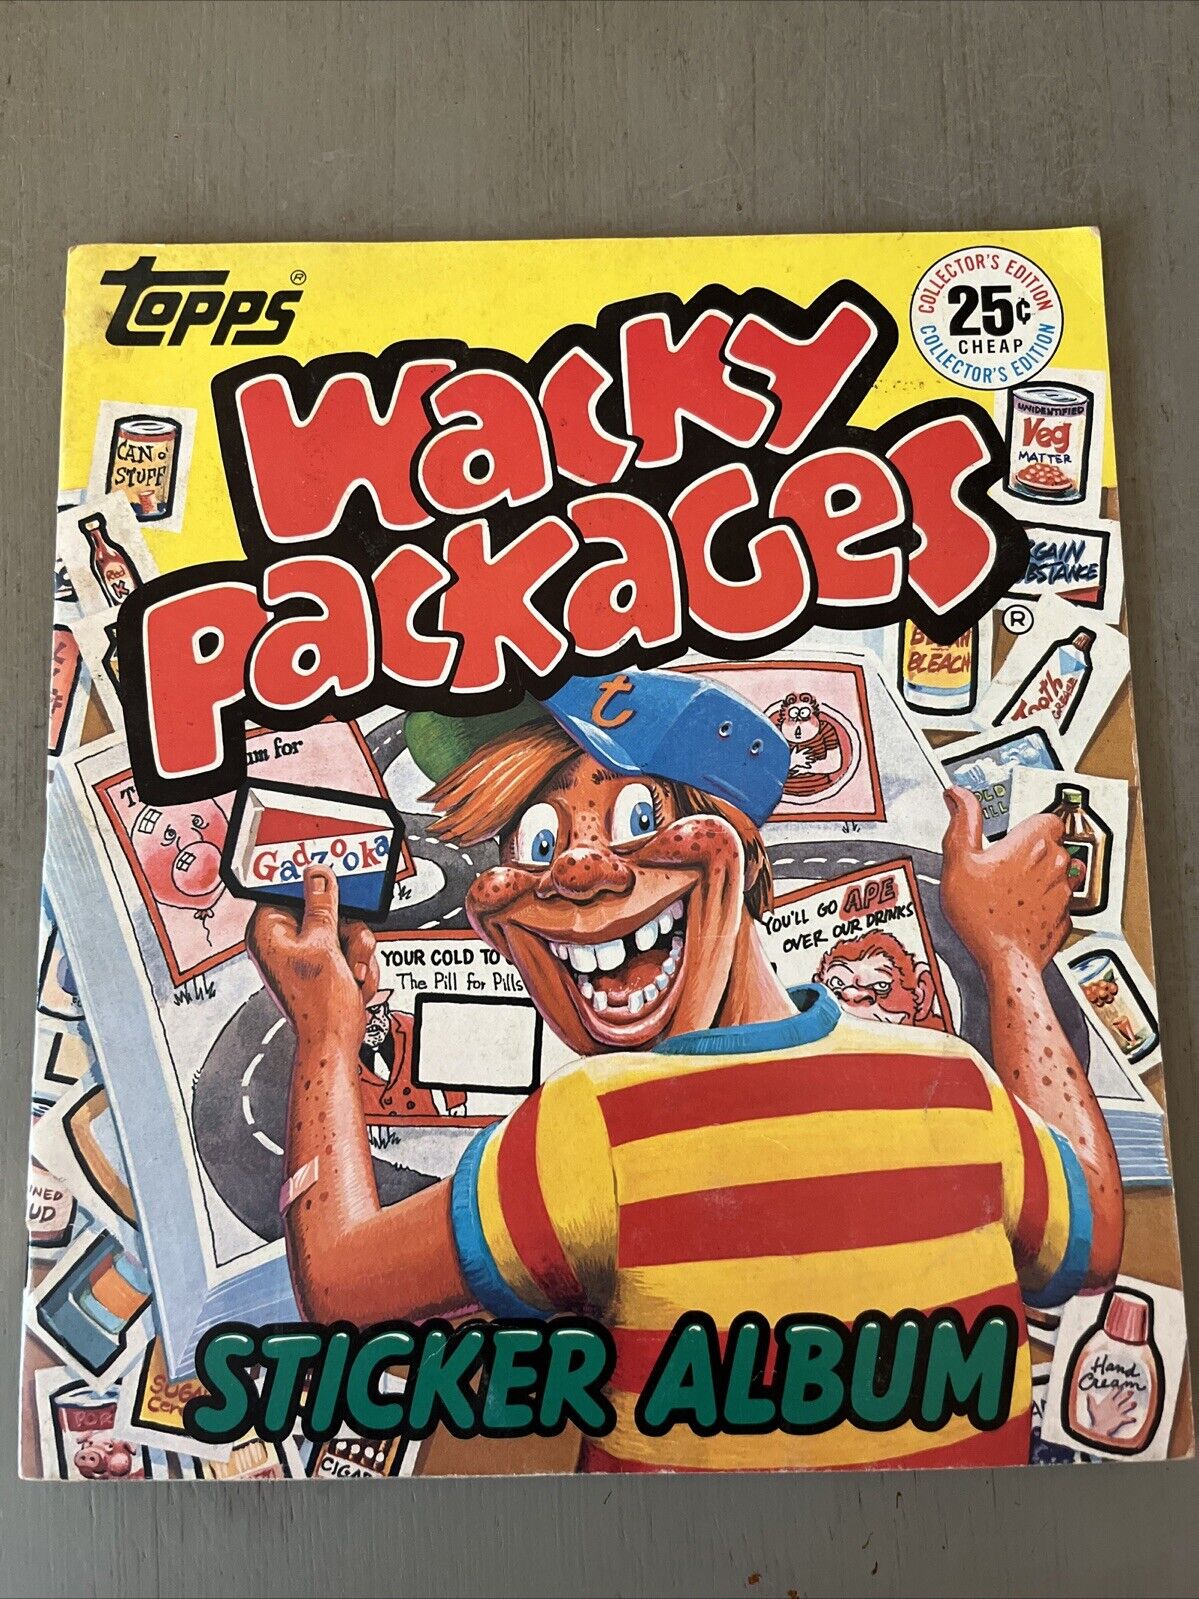 1982 TOPPS WACKY PACKAGES STICKER ALBUM Great Condition Nearly Complete Set